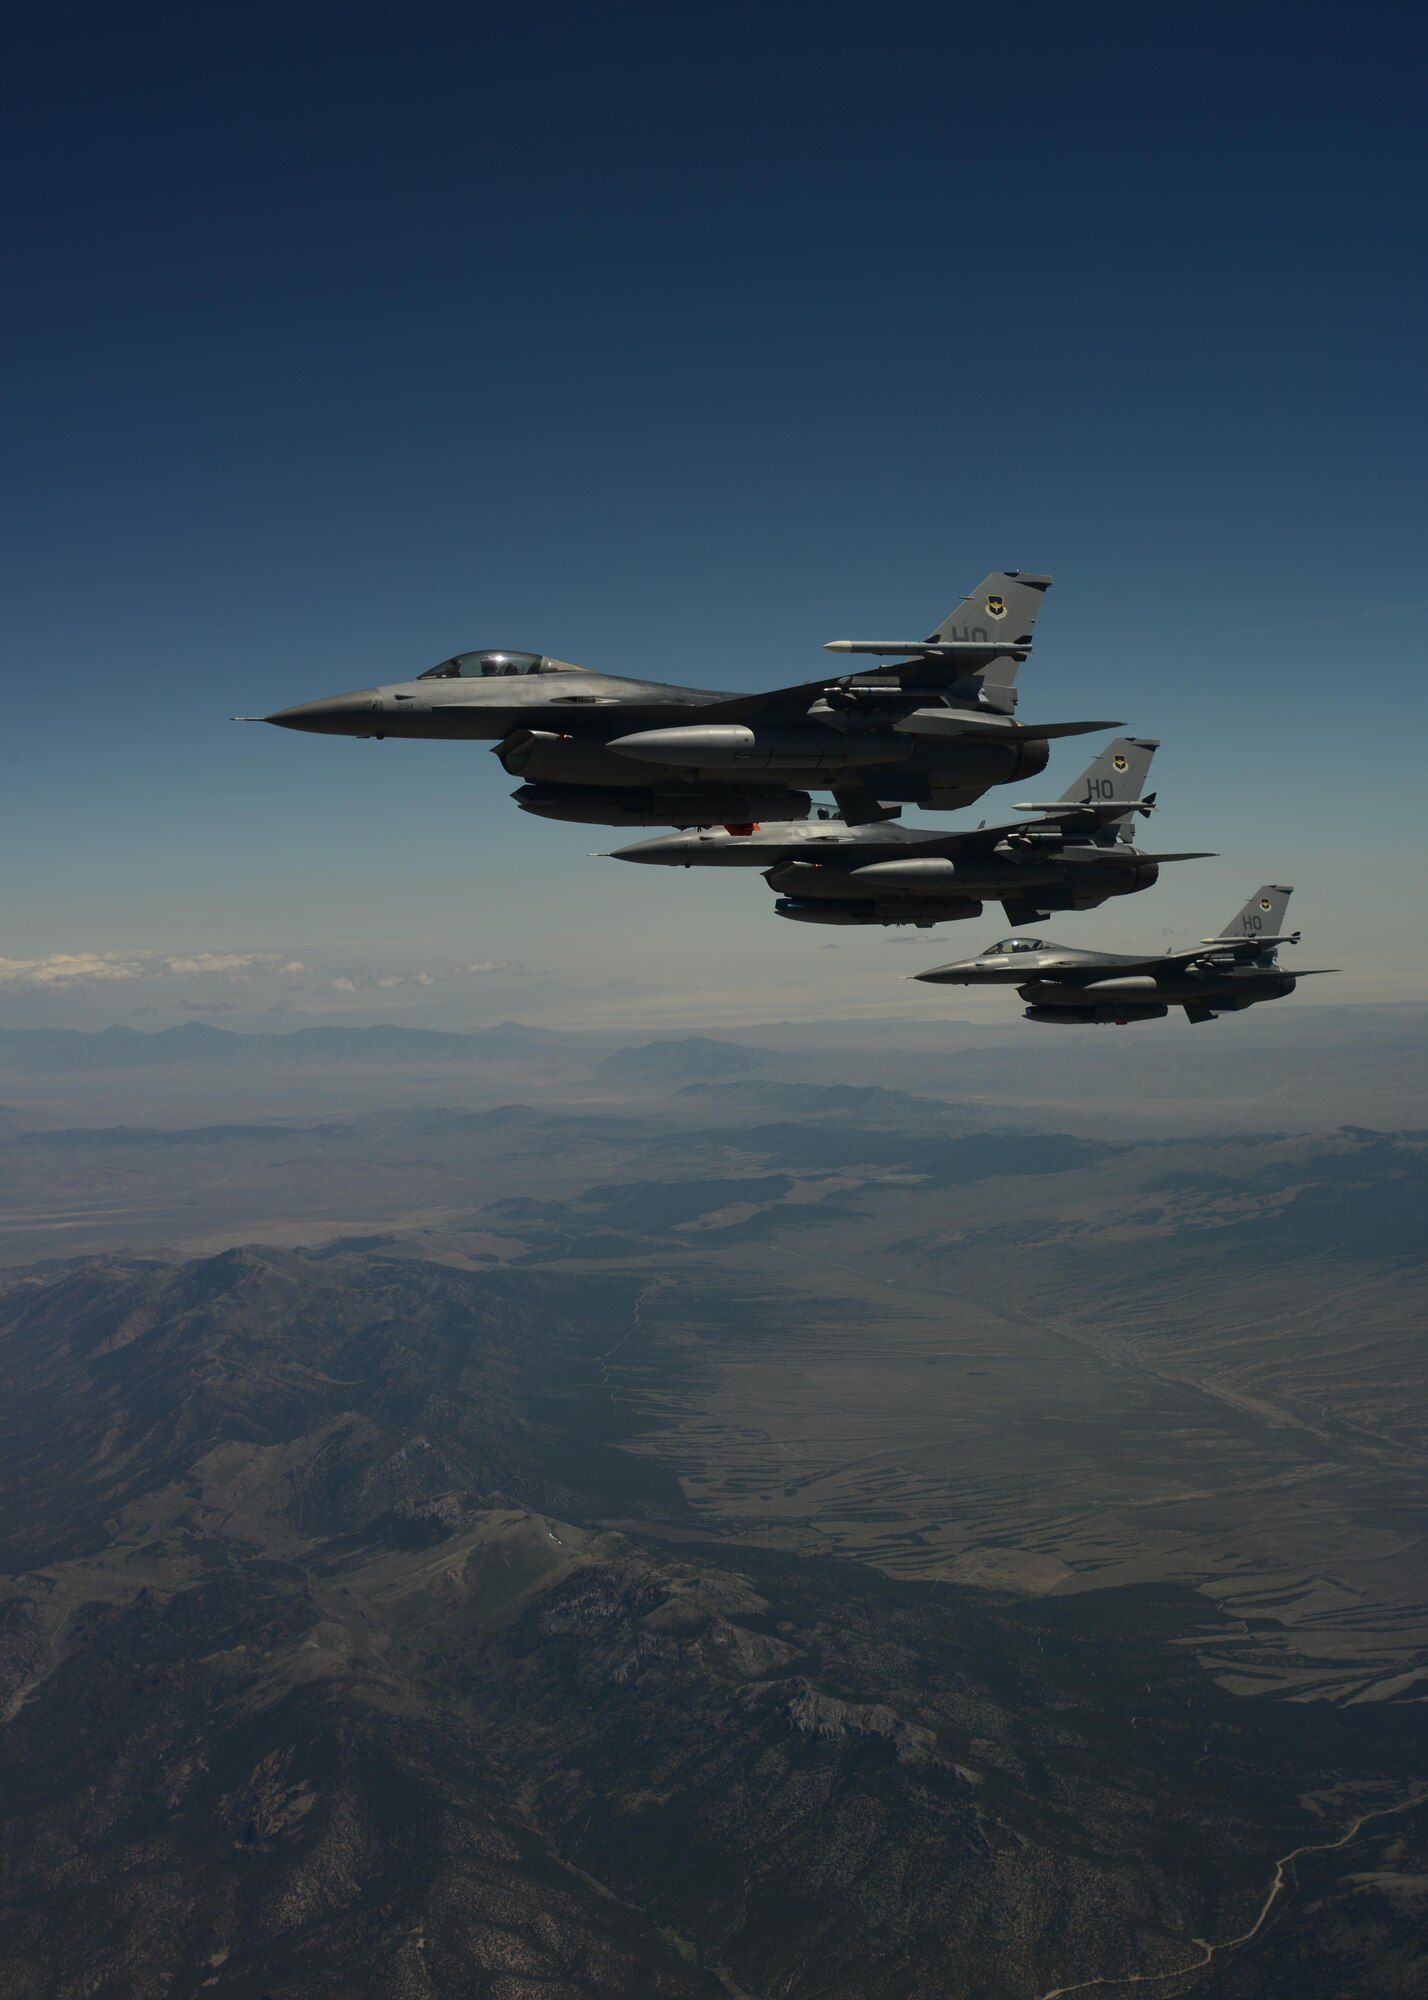 F-16C Fighting Falcons from the 388th Fighter Wing at Hill Air Force Base, Utah, fly together June 9, 2017. The Fighting Falcons were refueled by a KC-135 Stratotanker during an air refueling trainer mission. (U.S. Air Force photo by Airman 1st Class Andrew Moore)